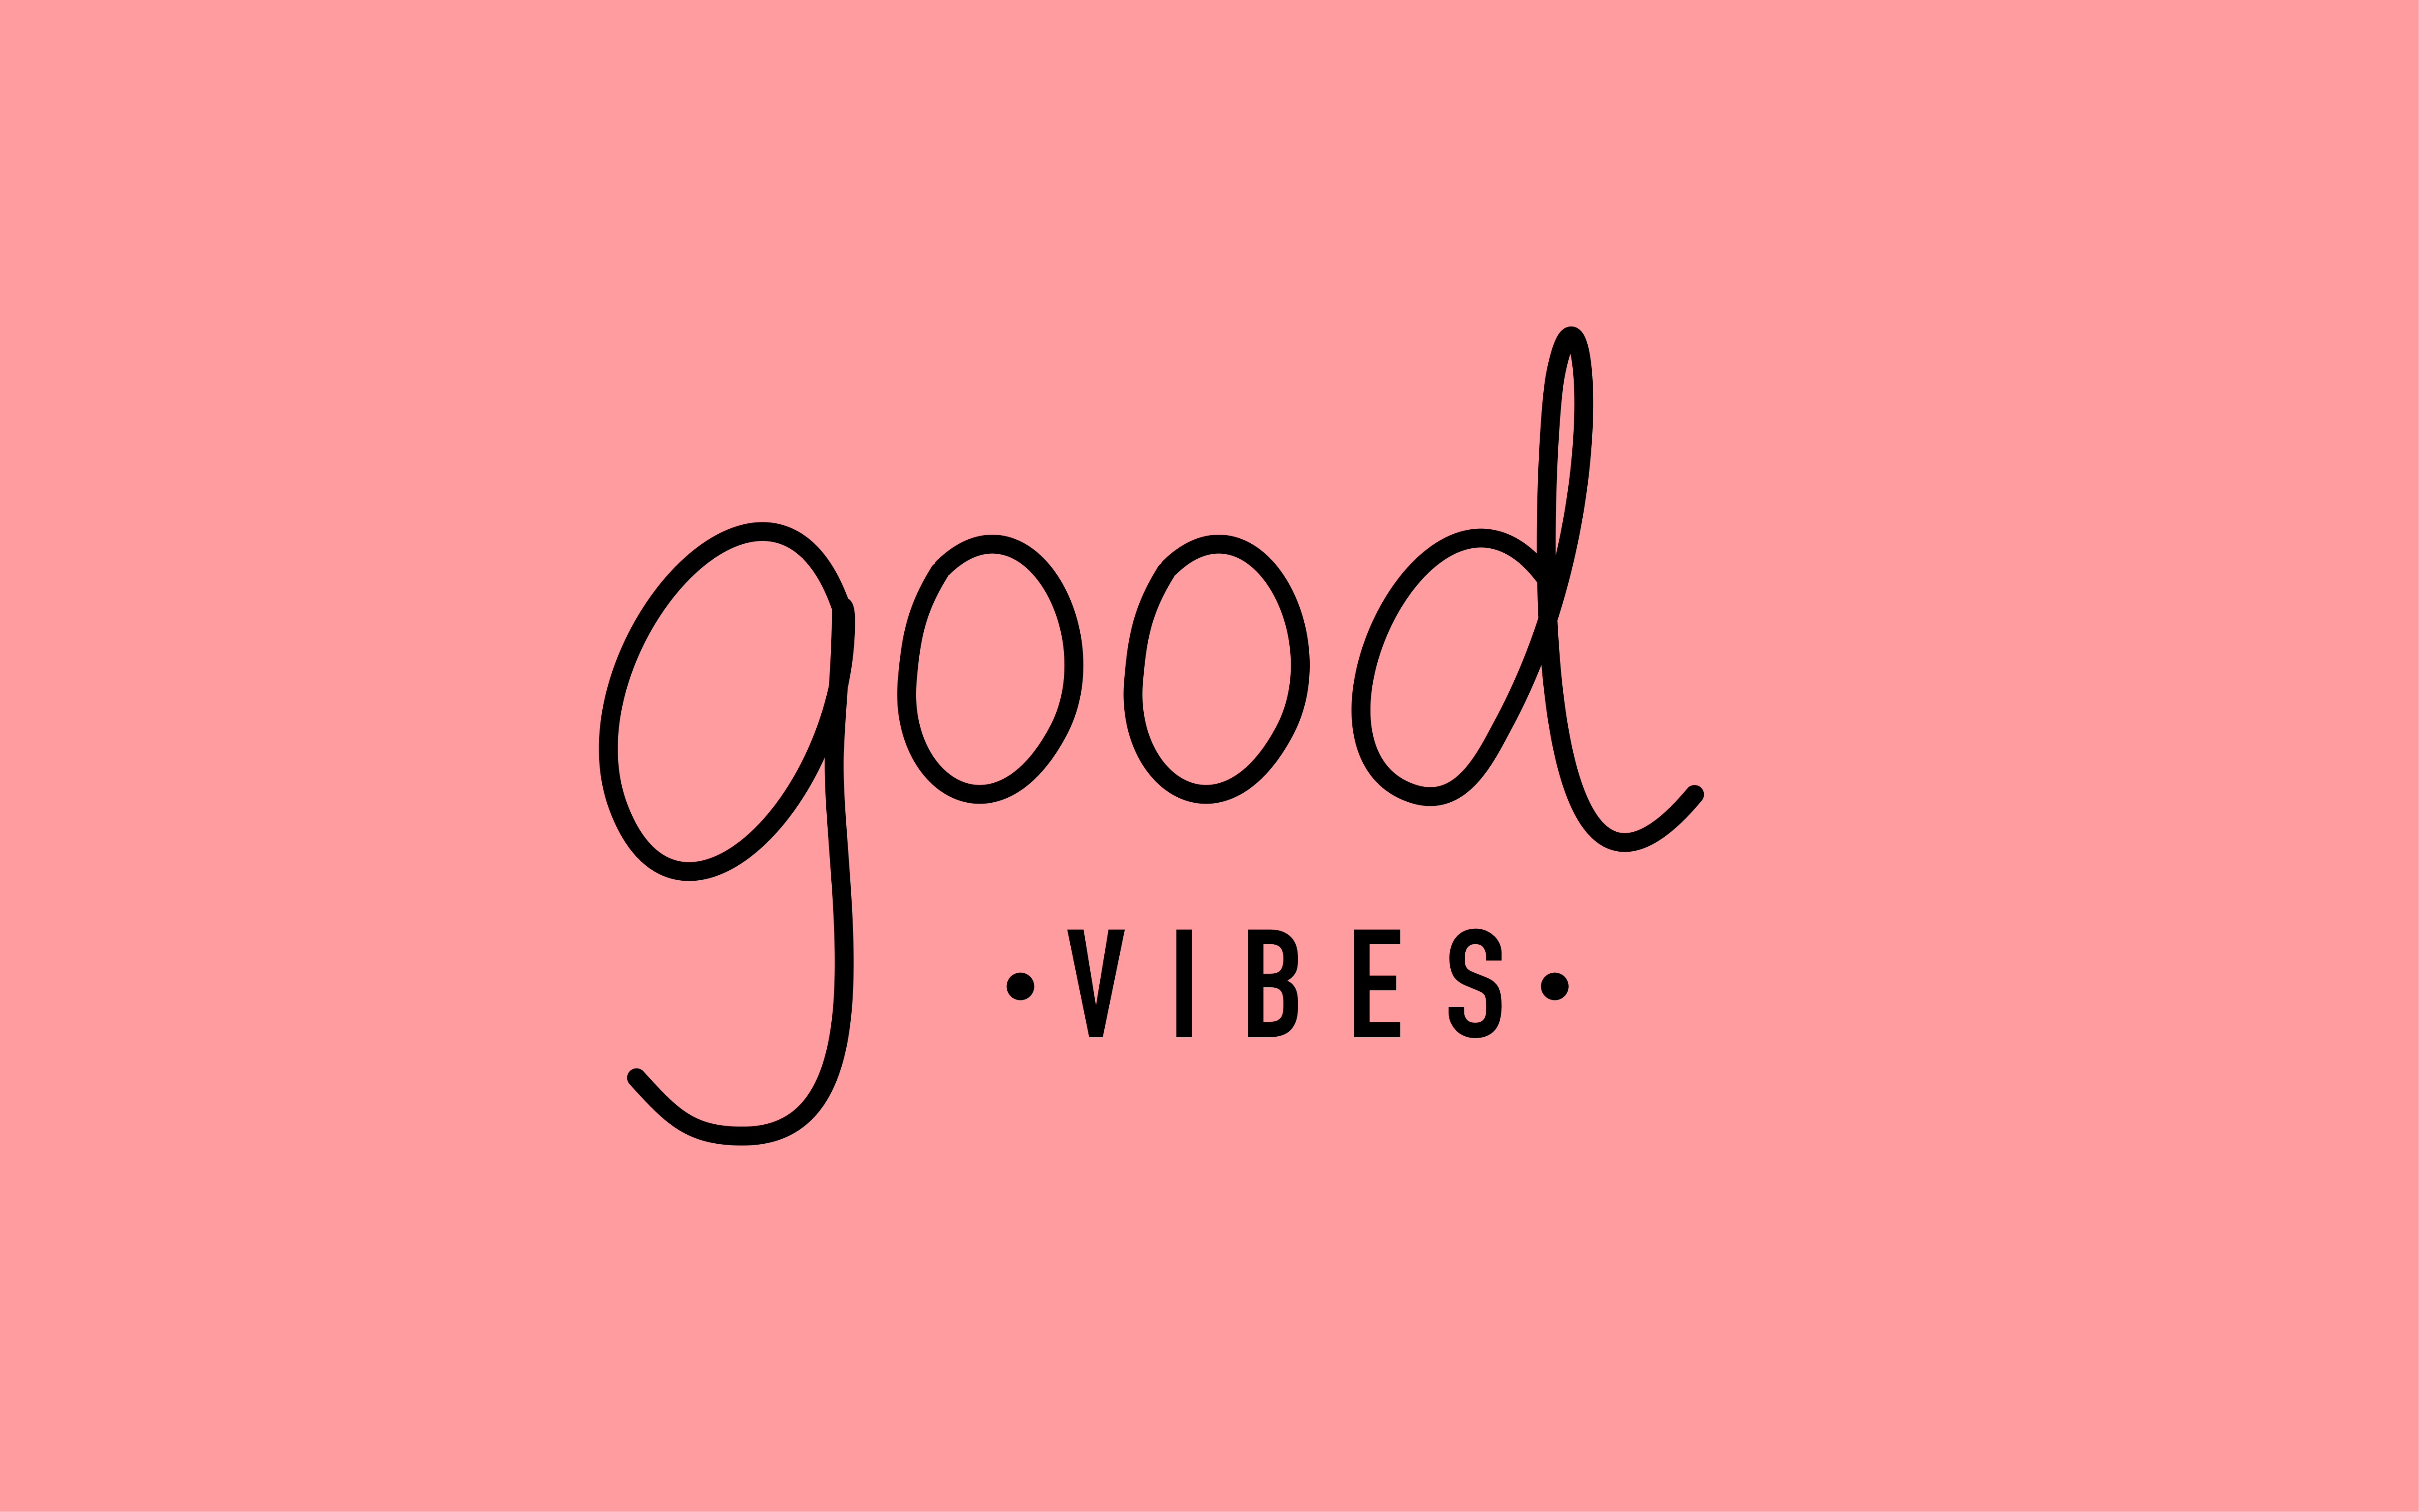 The good vibes logo on a pink background - 